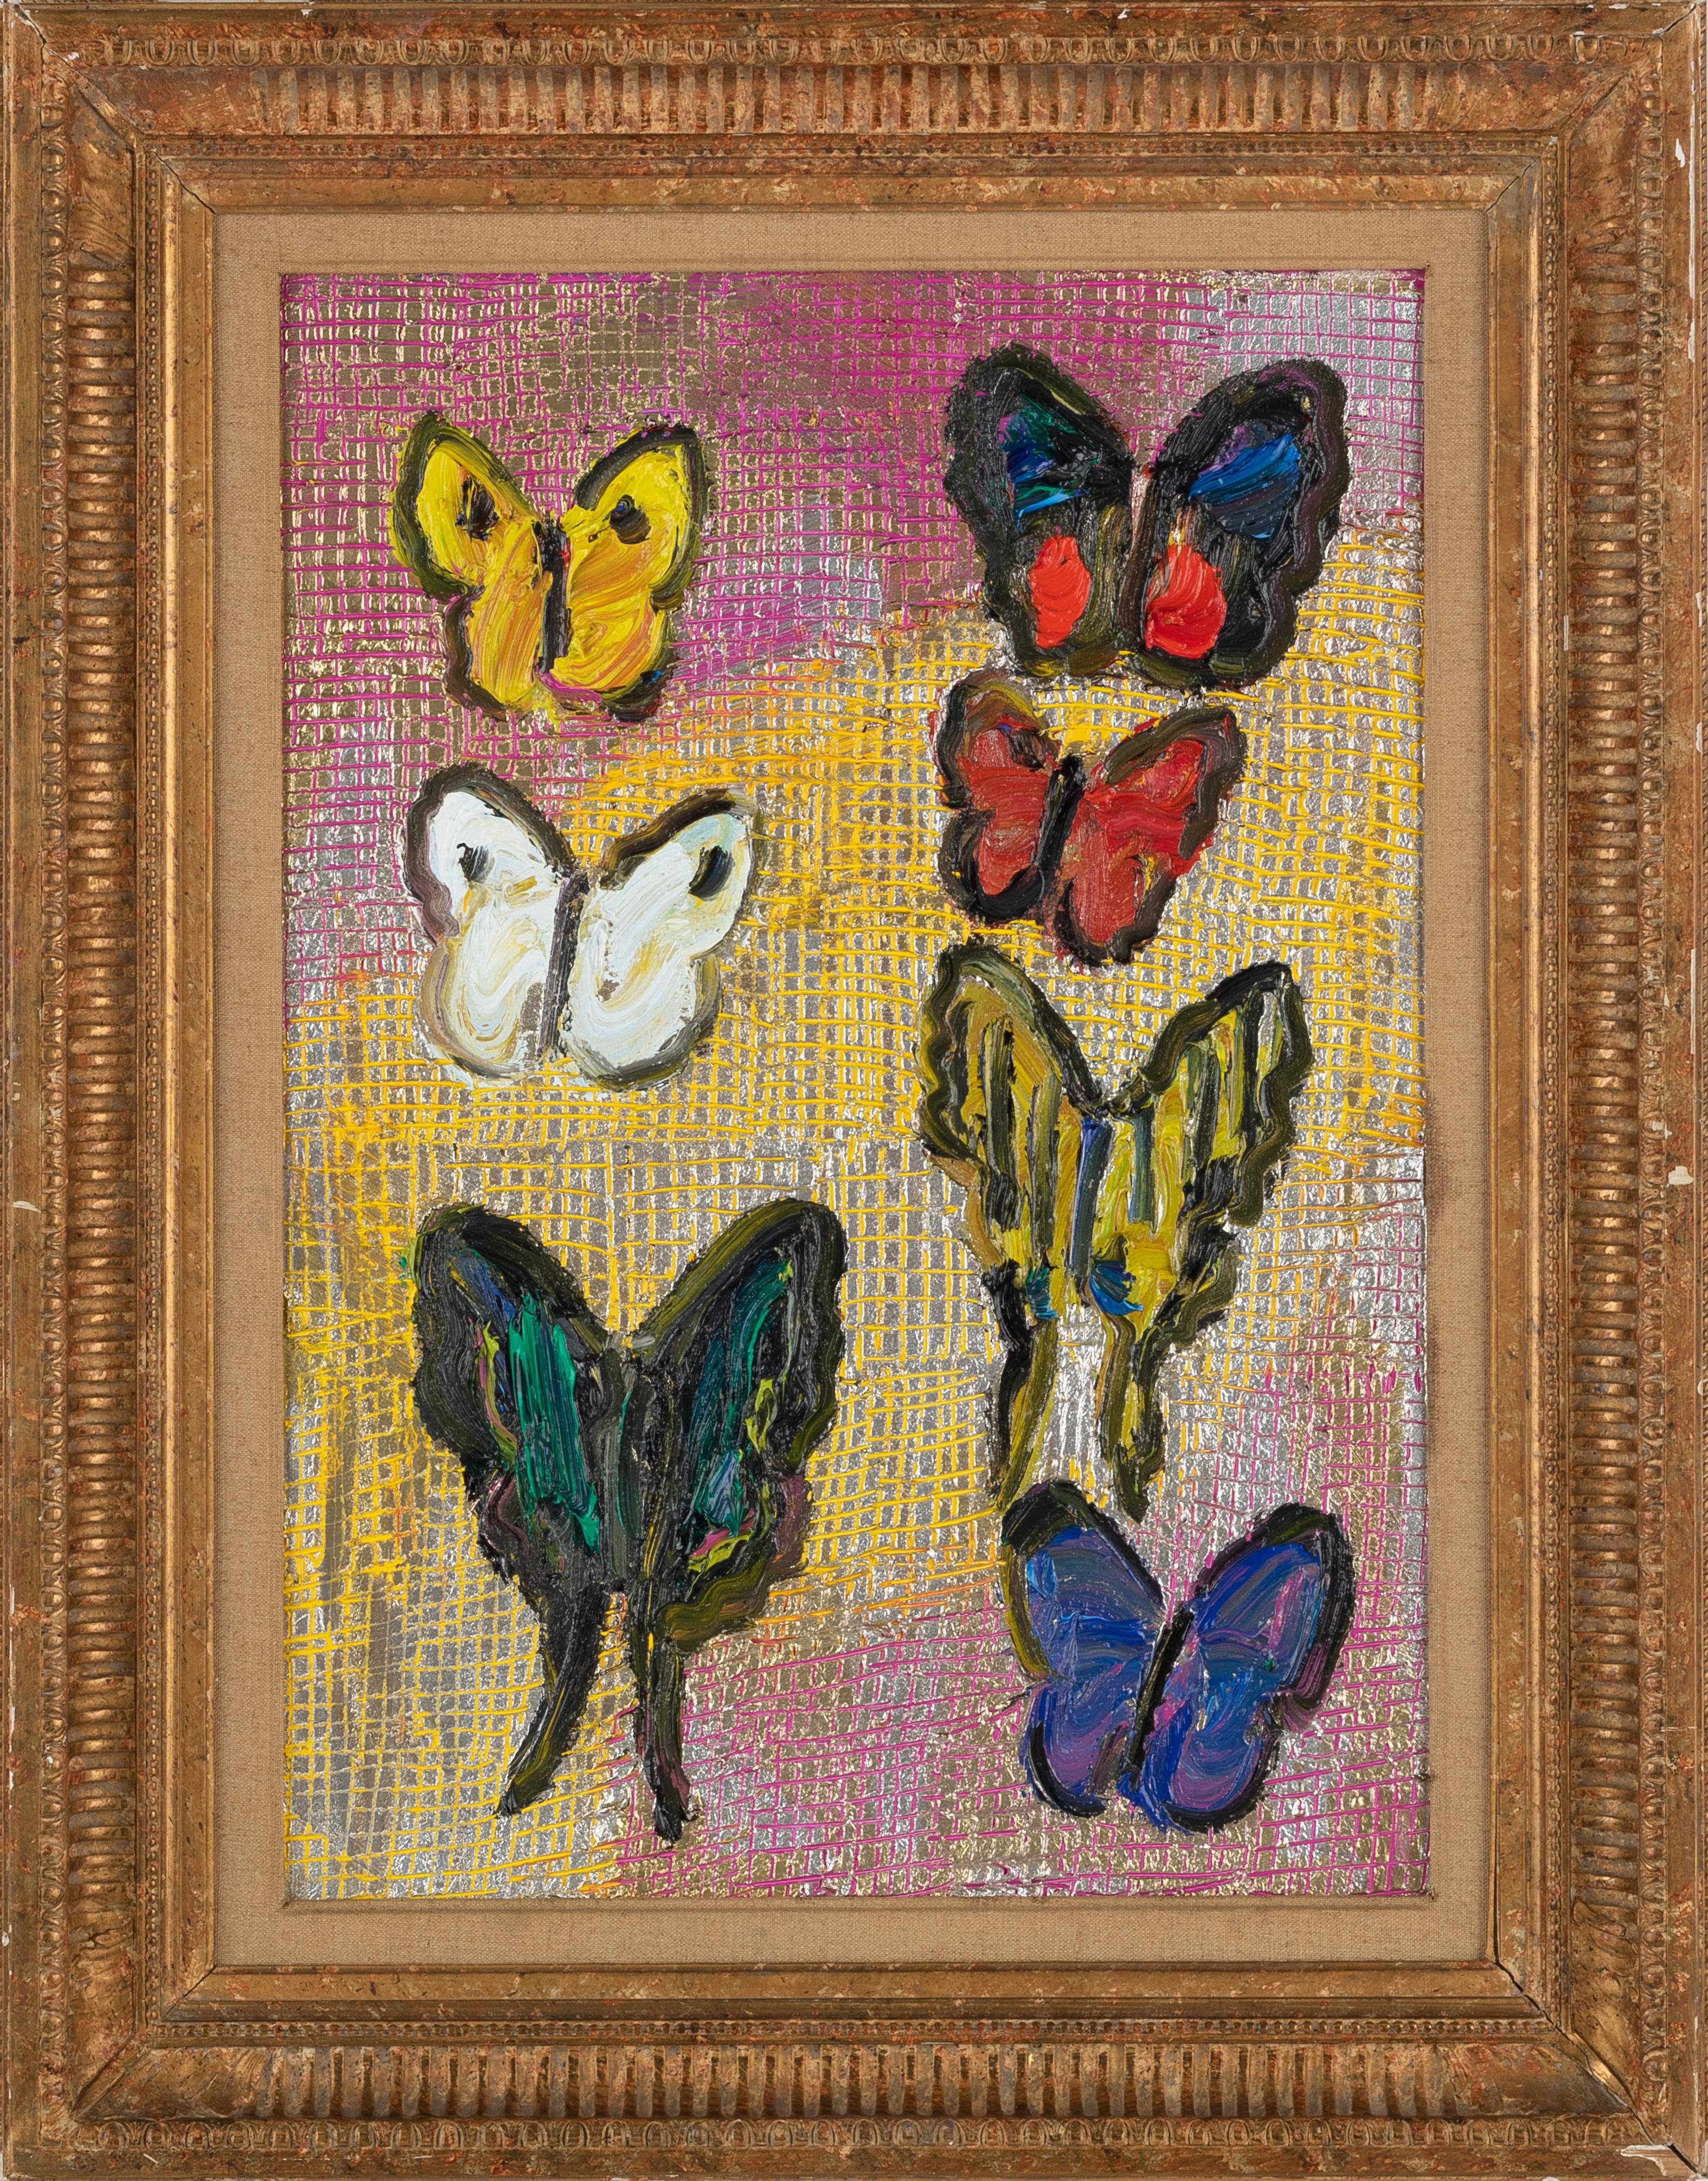 Hunt Slonem "Score" Multicolored Metallic Butterflies
Black outlined white and gold butterflies on a white scored metallic gold background.  

Unframed: 22 x 16 in.
Framed: 29 x 22.5 in.  
*Painting is framed - Please note that not all Hunt Slonem